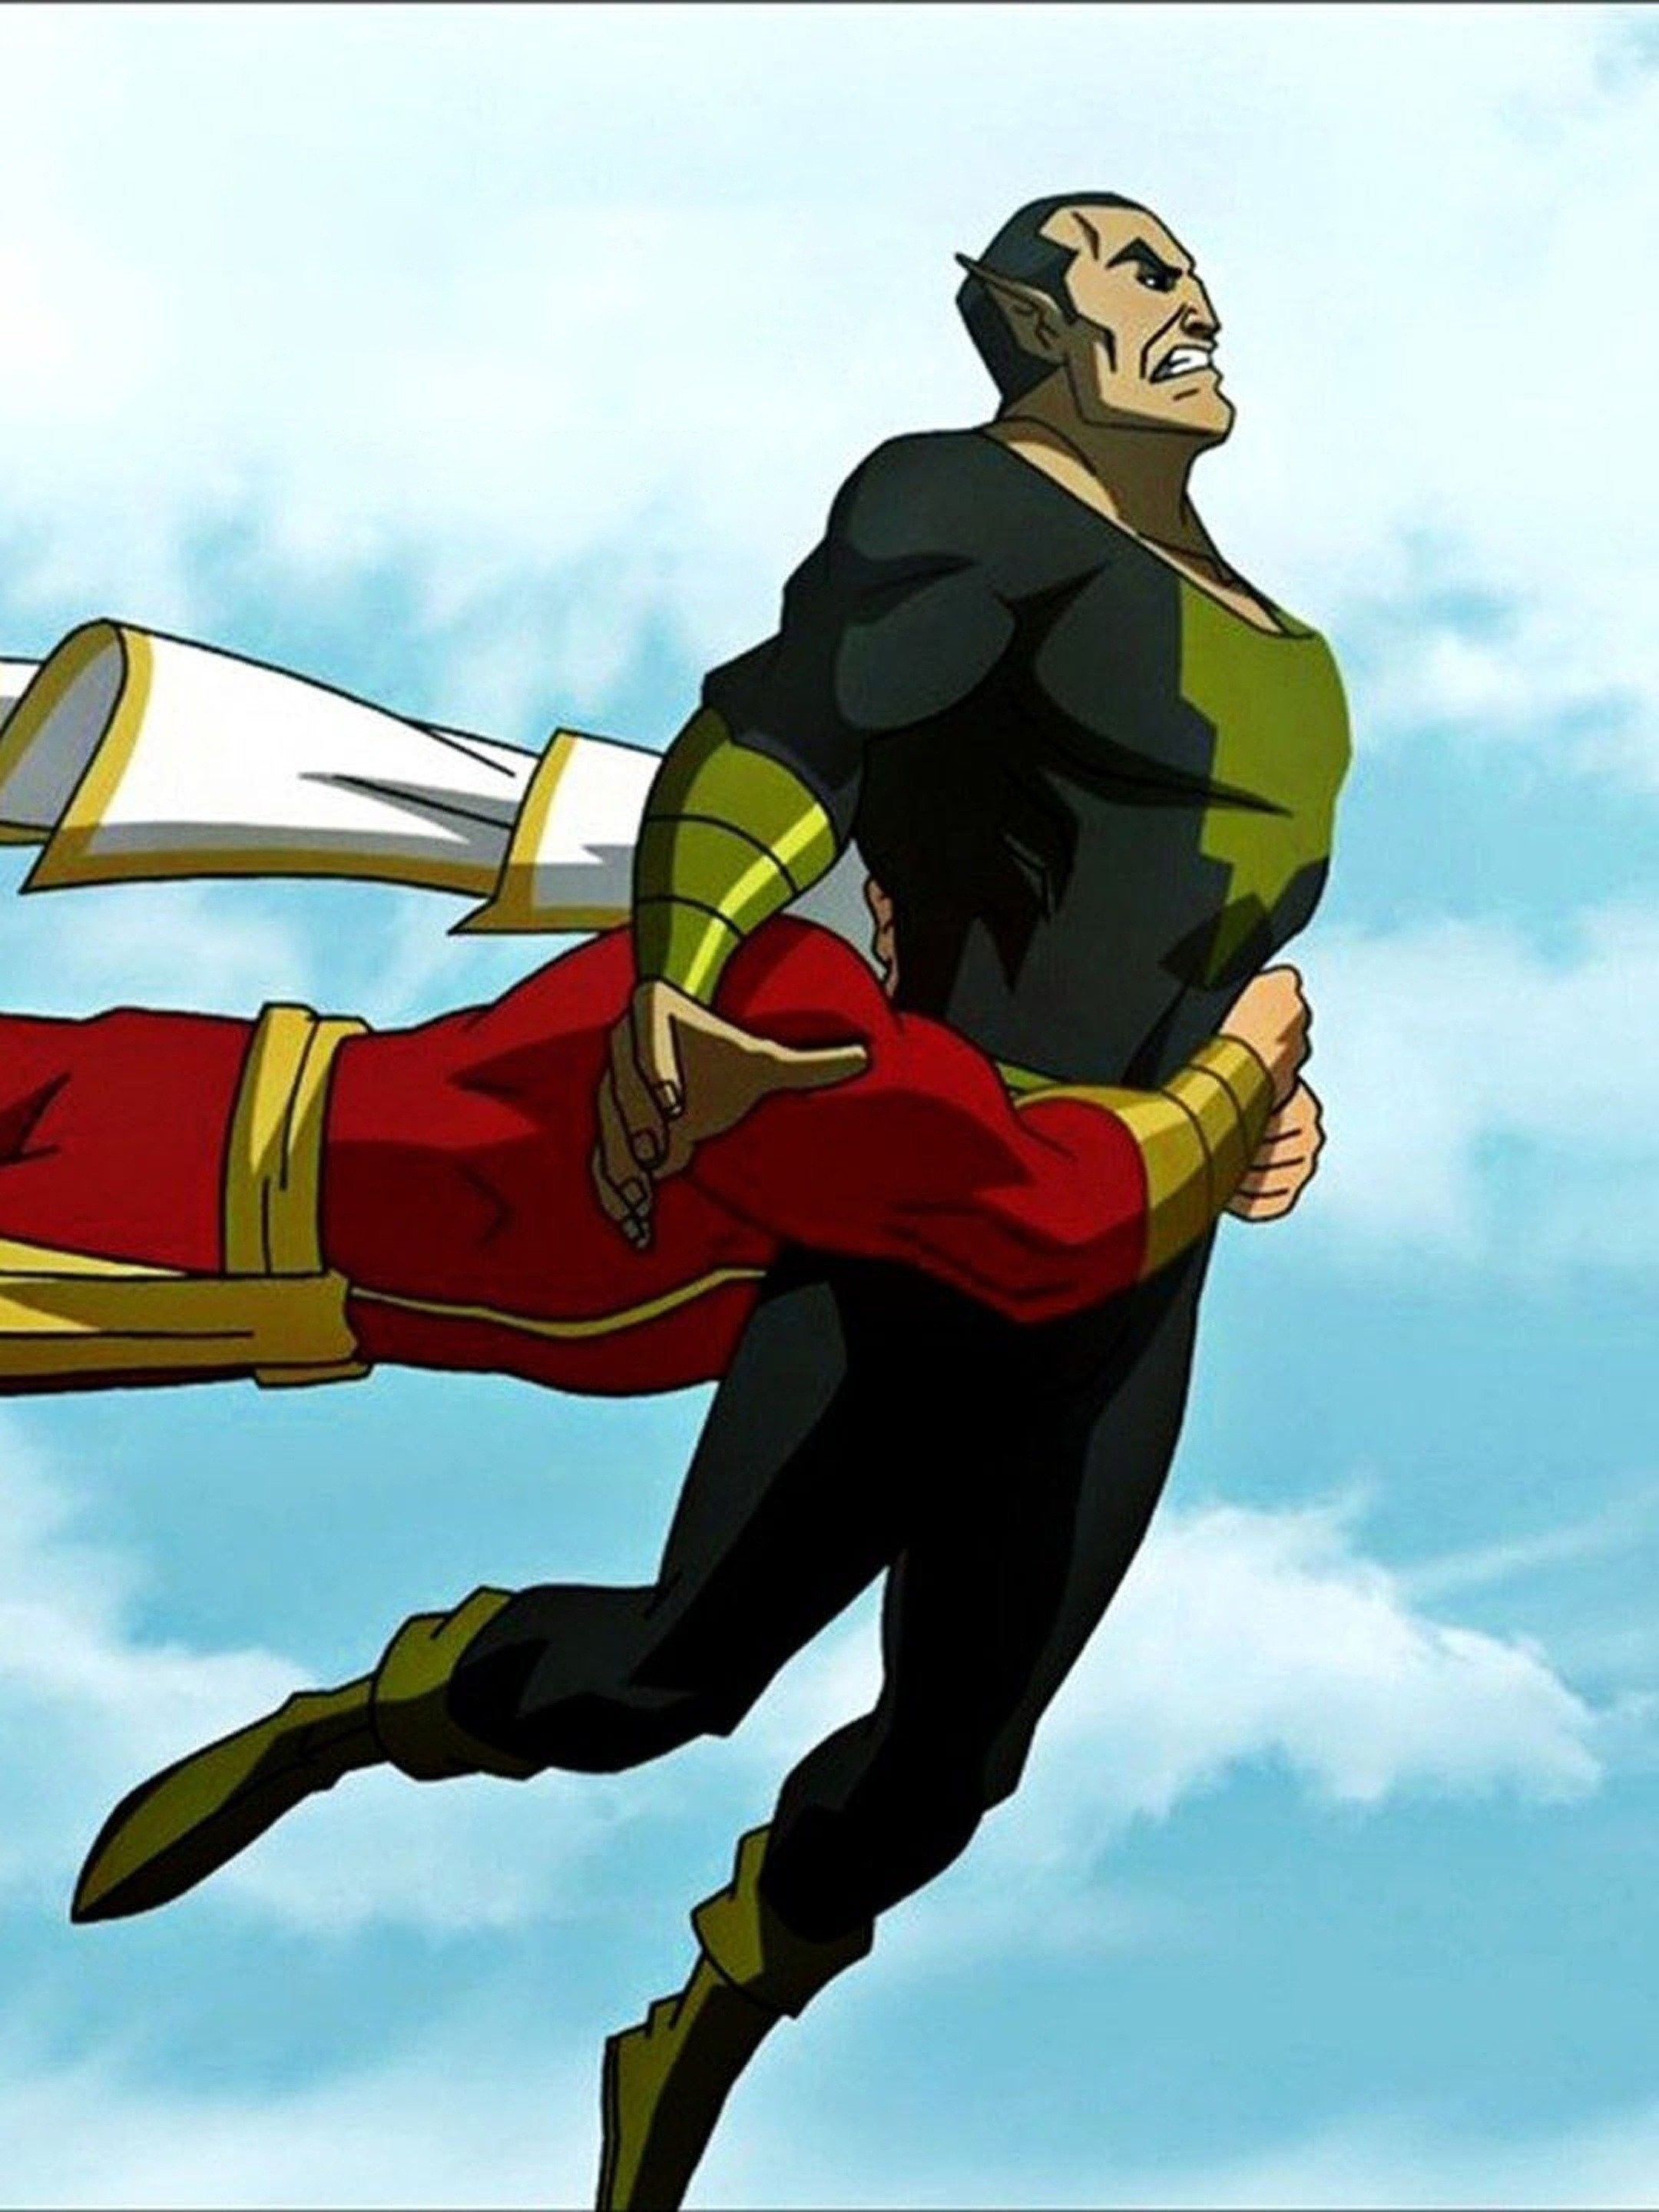 Black Adam debuts with 53% on Rotten Tomatoes after dozens of